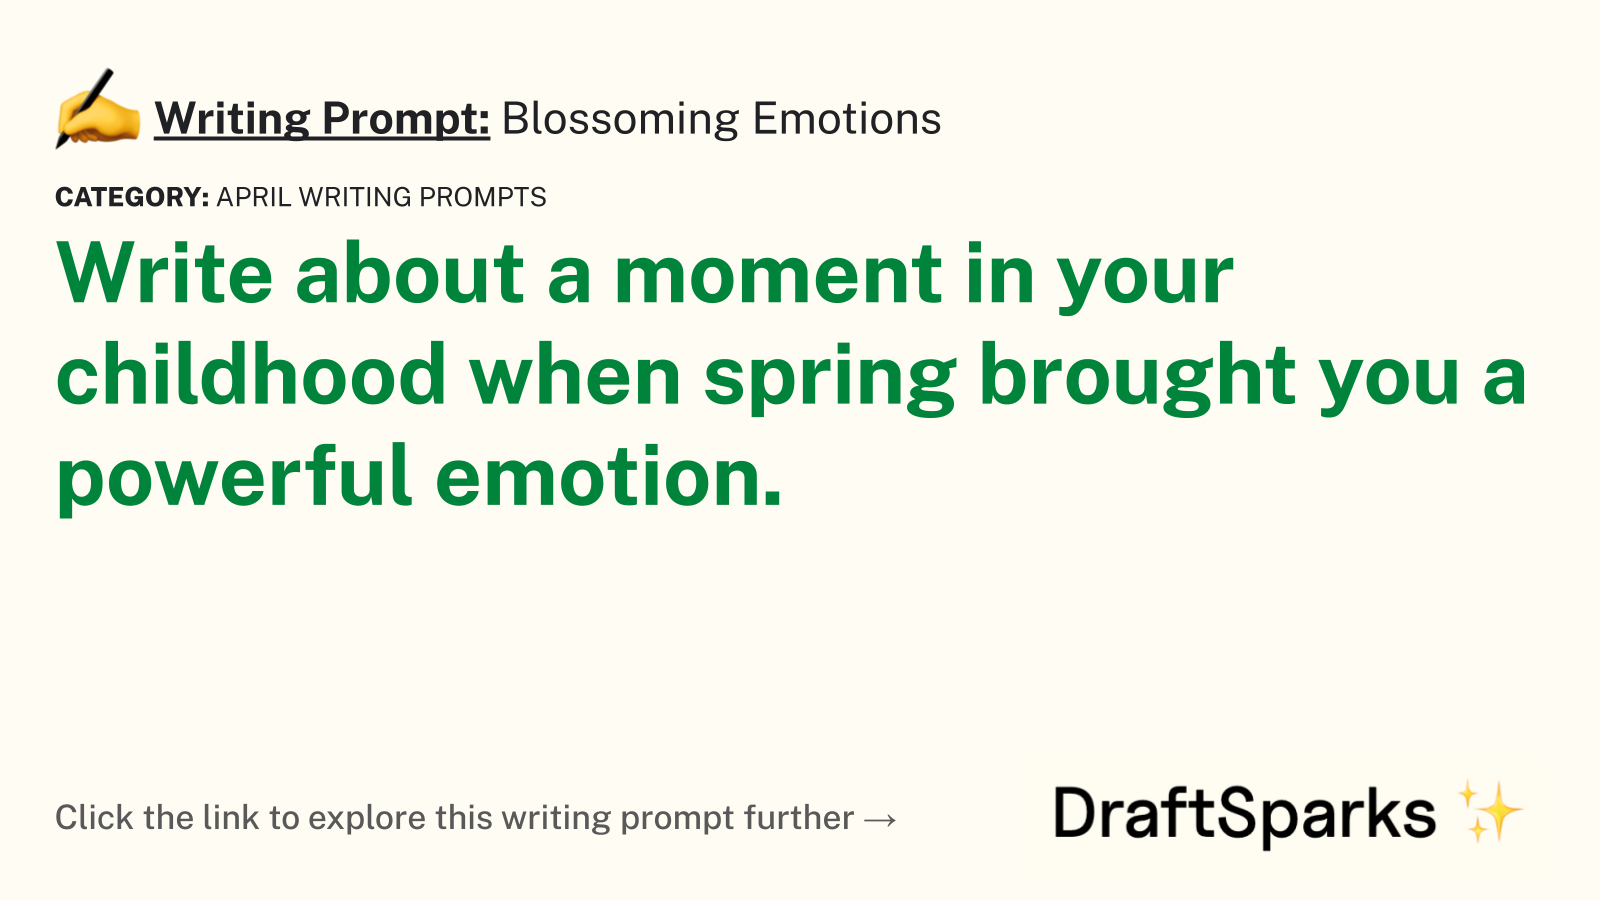 Blossoming Emotions